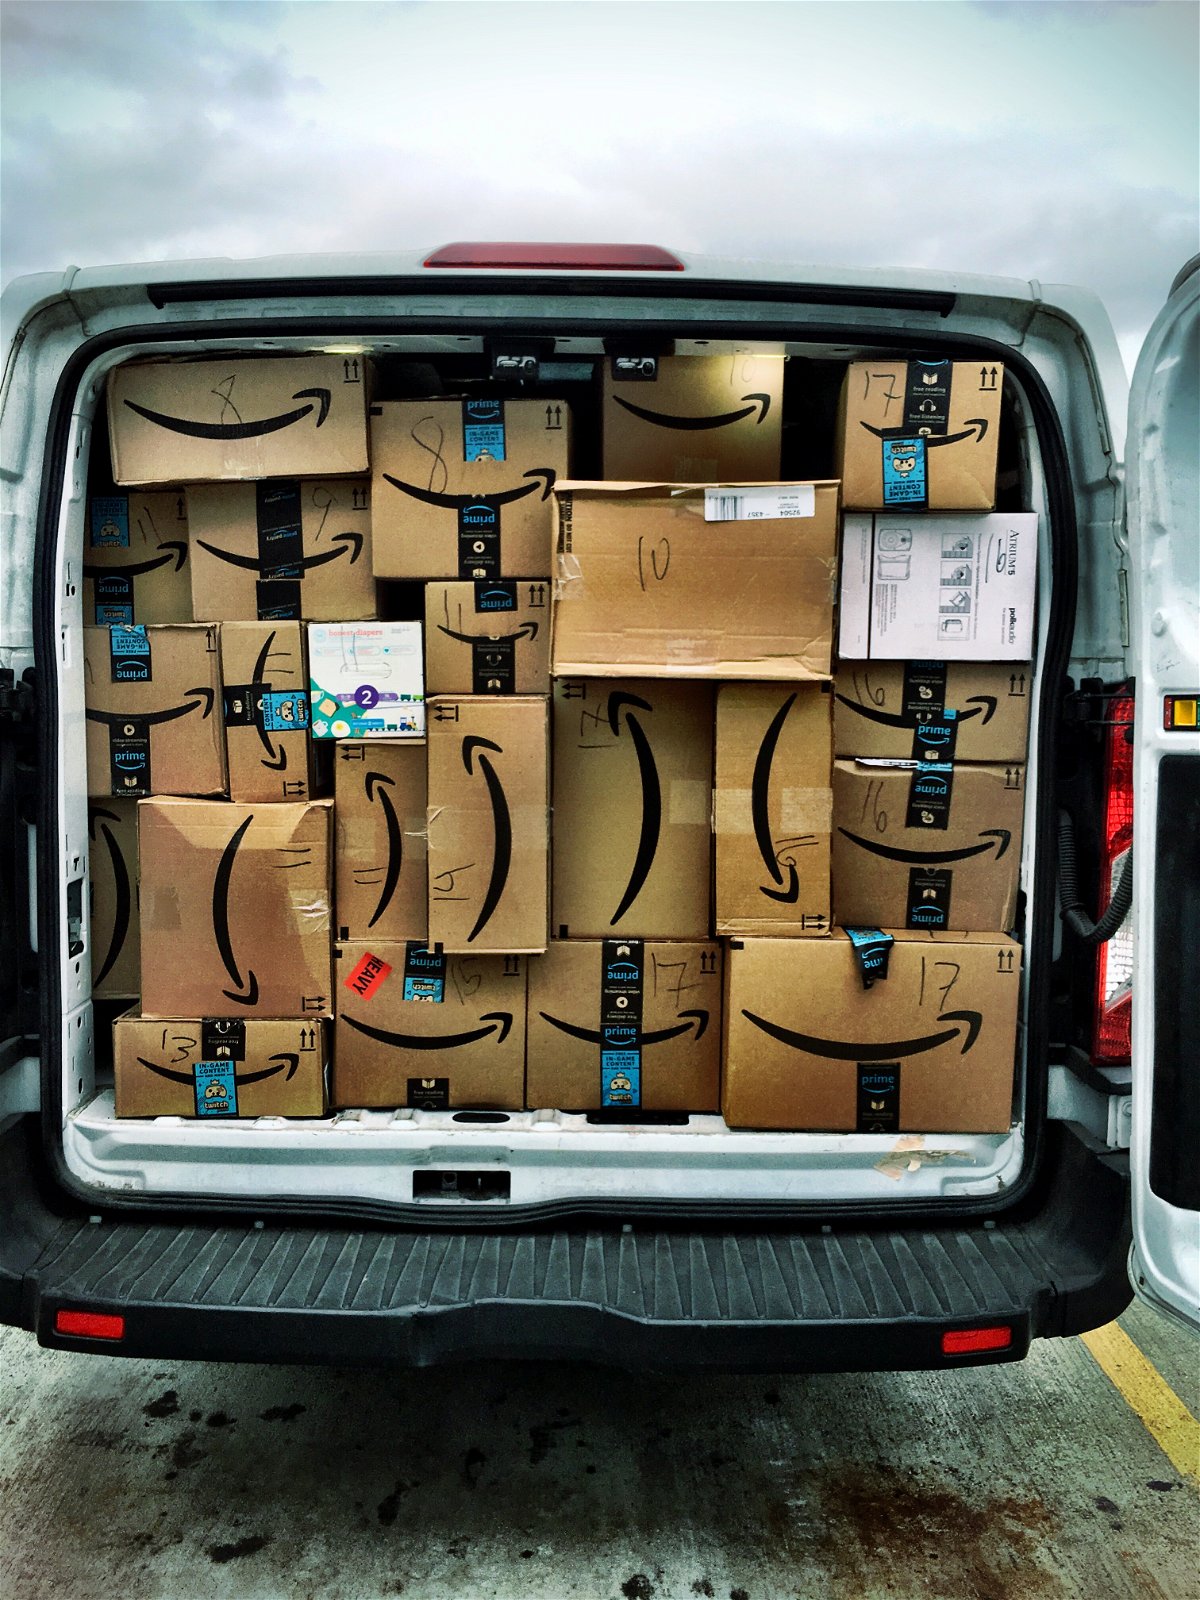 a-van-full-of-amazon-packages_t20_doQza9